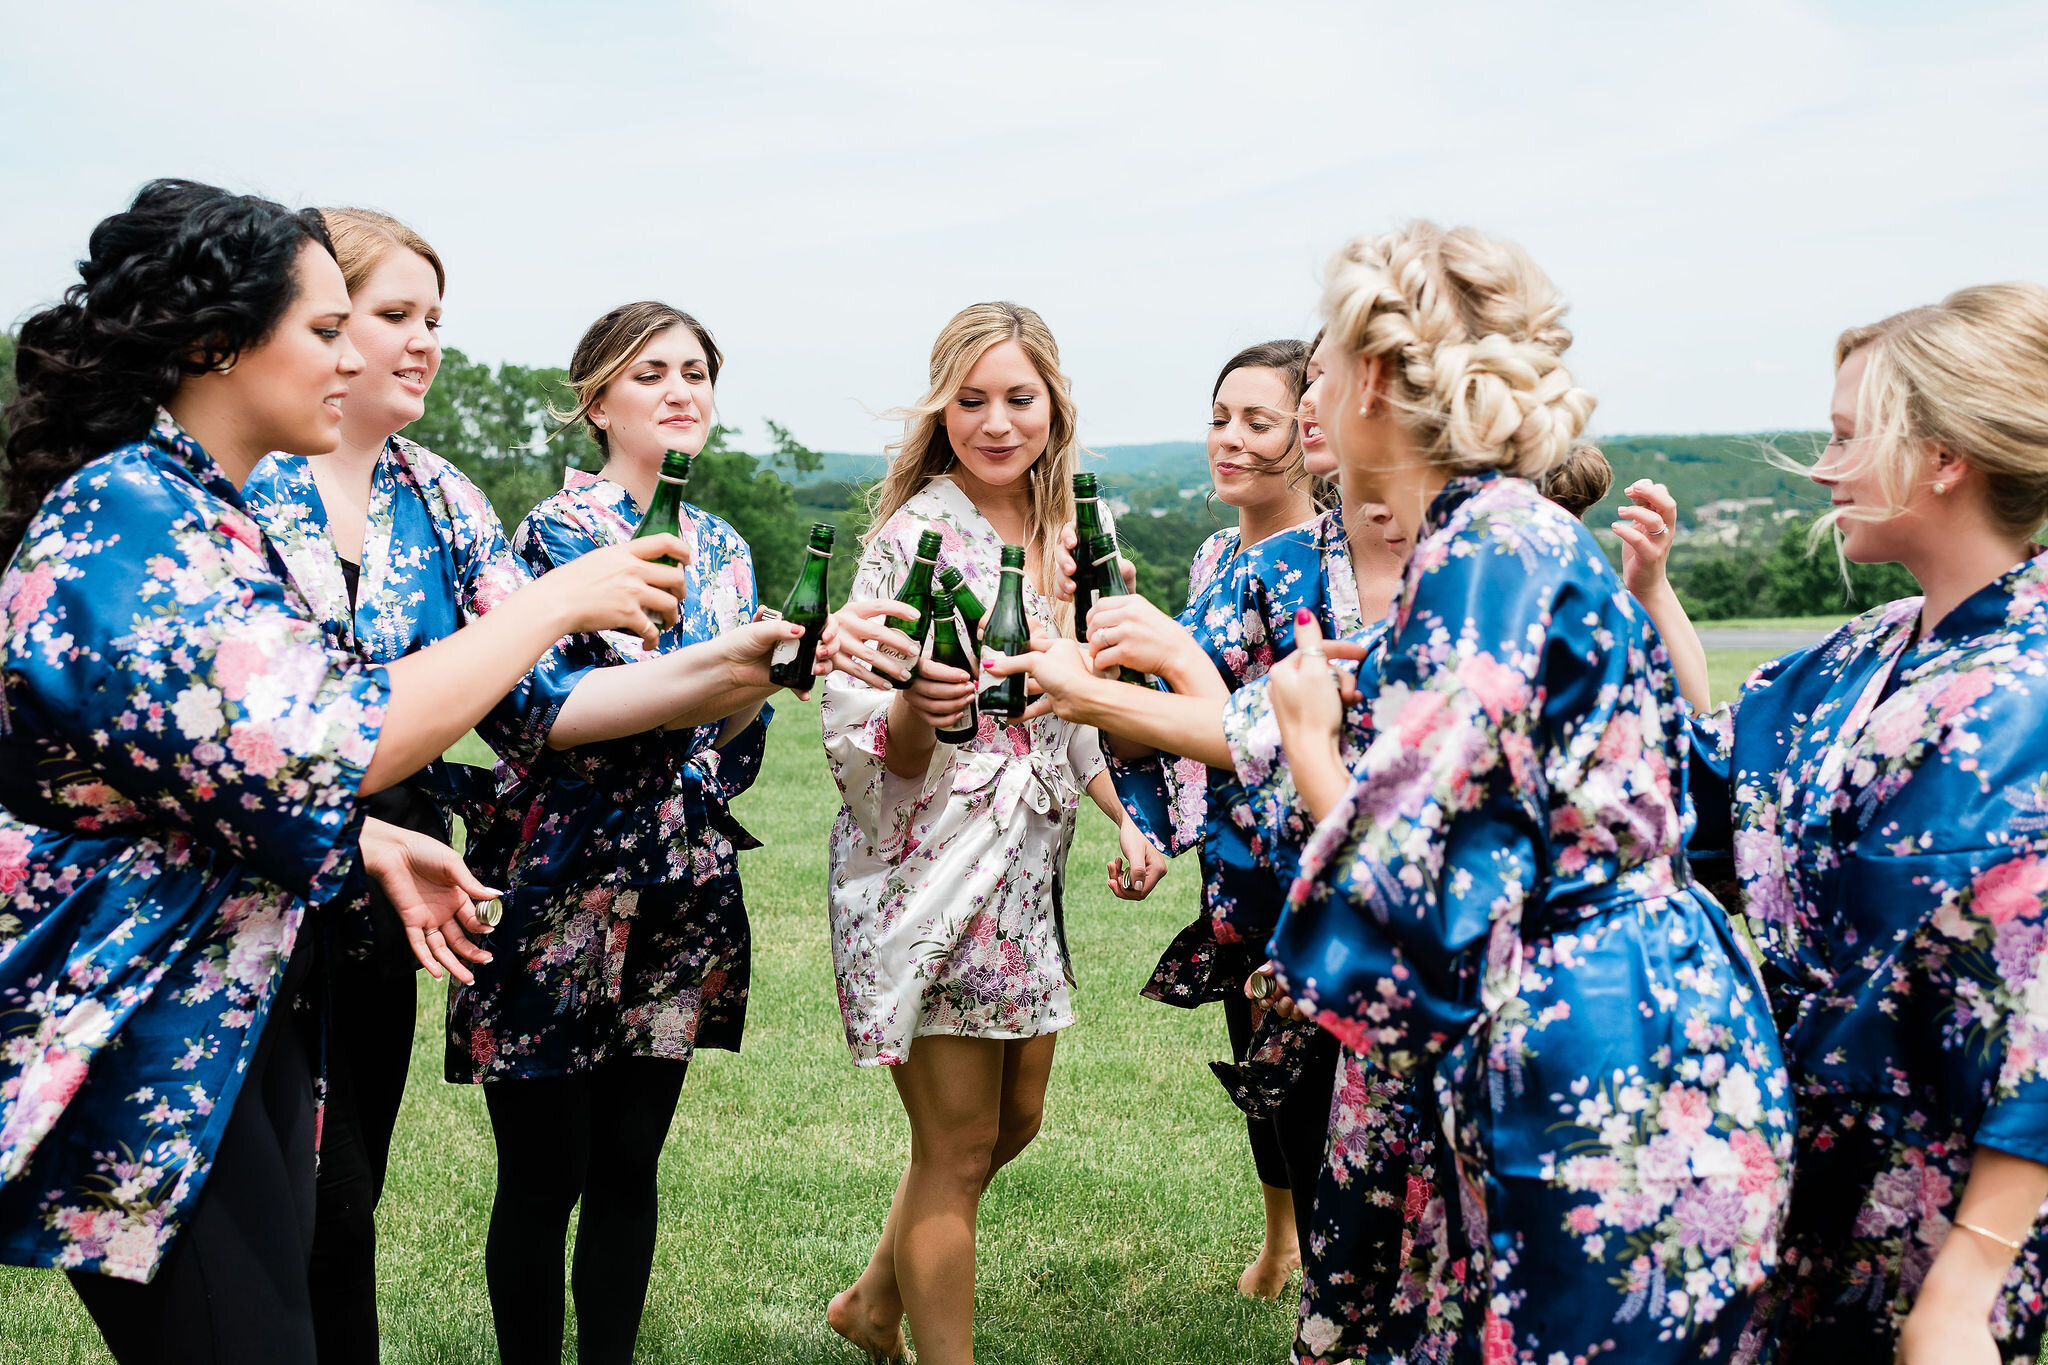 Bride and bridesmaids clinking personal champagne bottles together